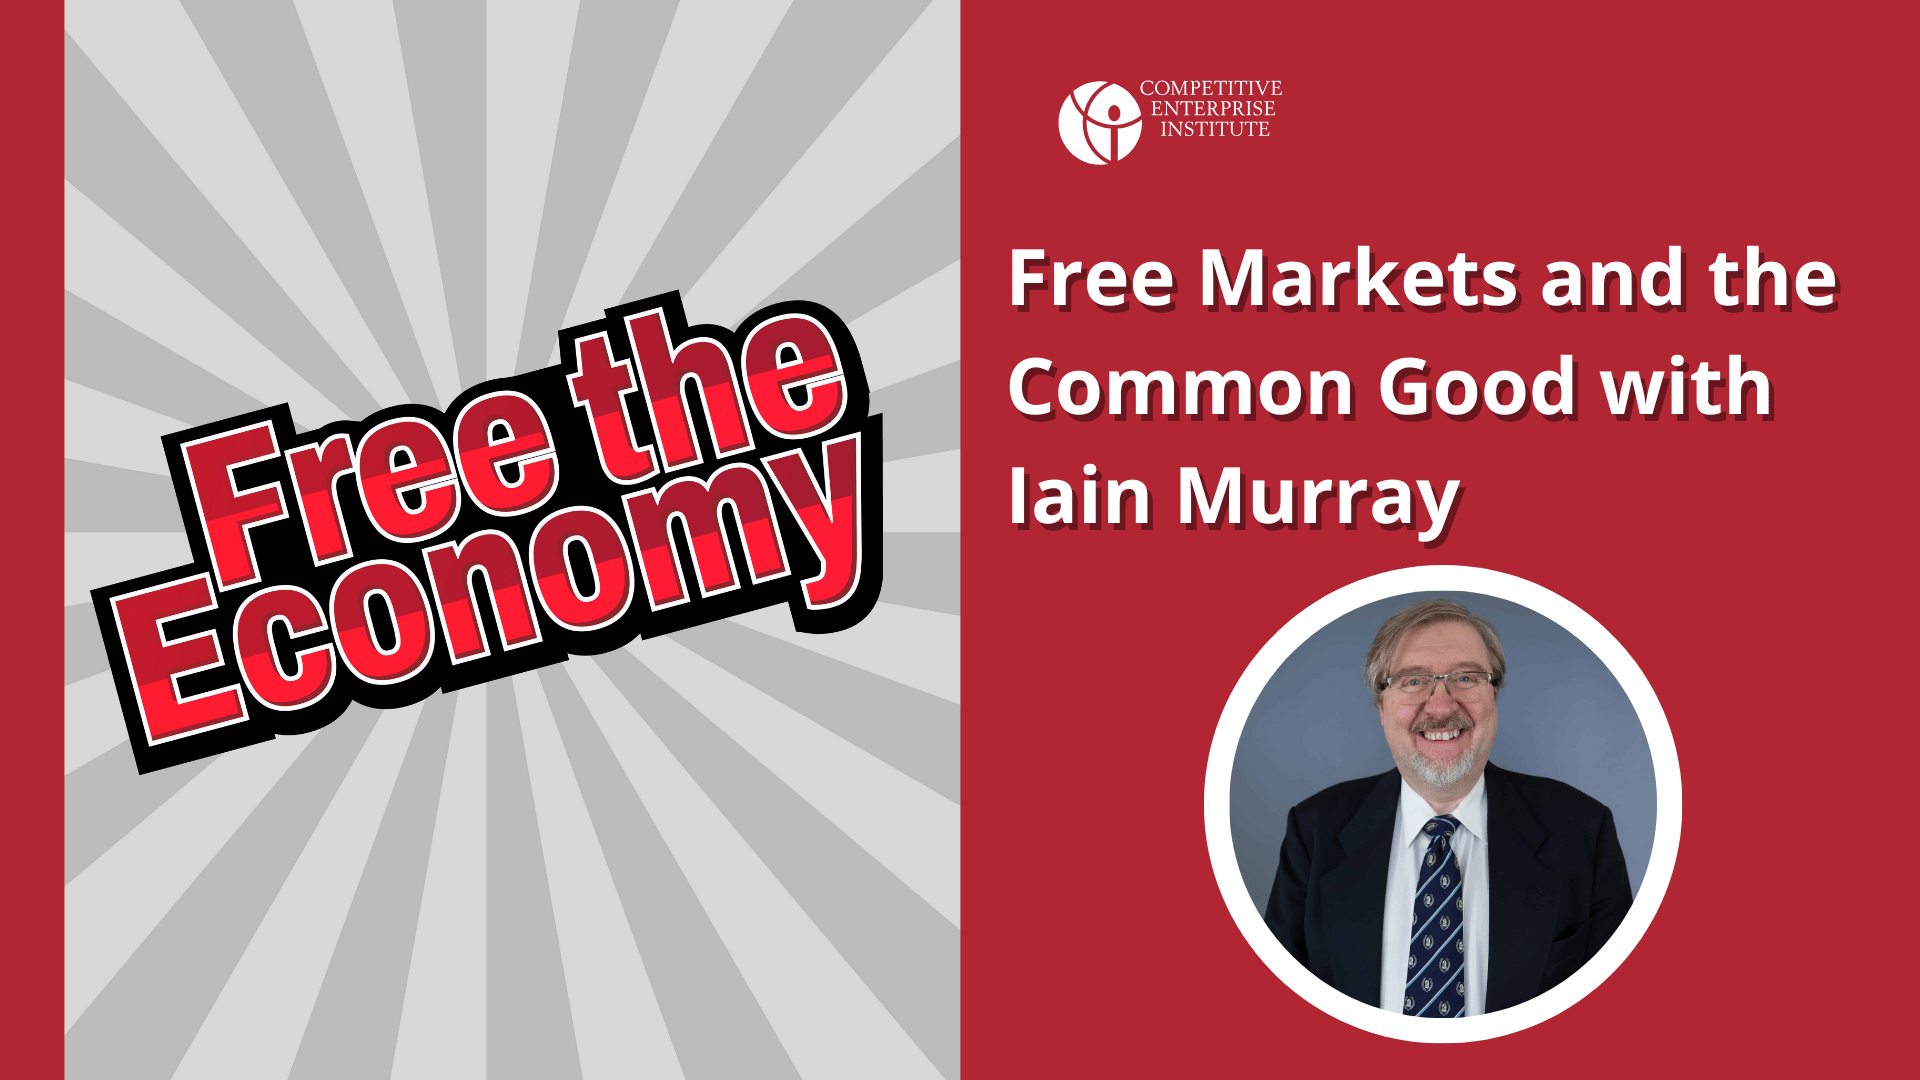 Free Markets and the Common Good with Iain Murray